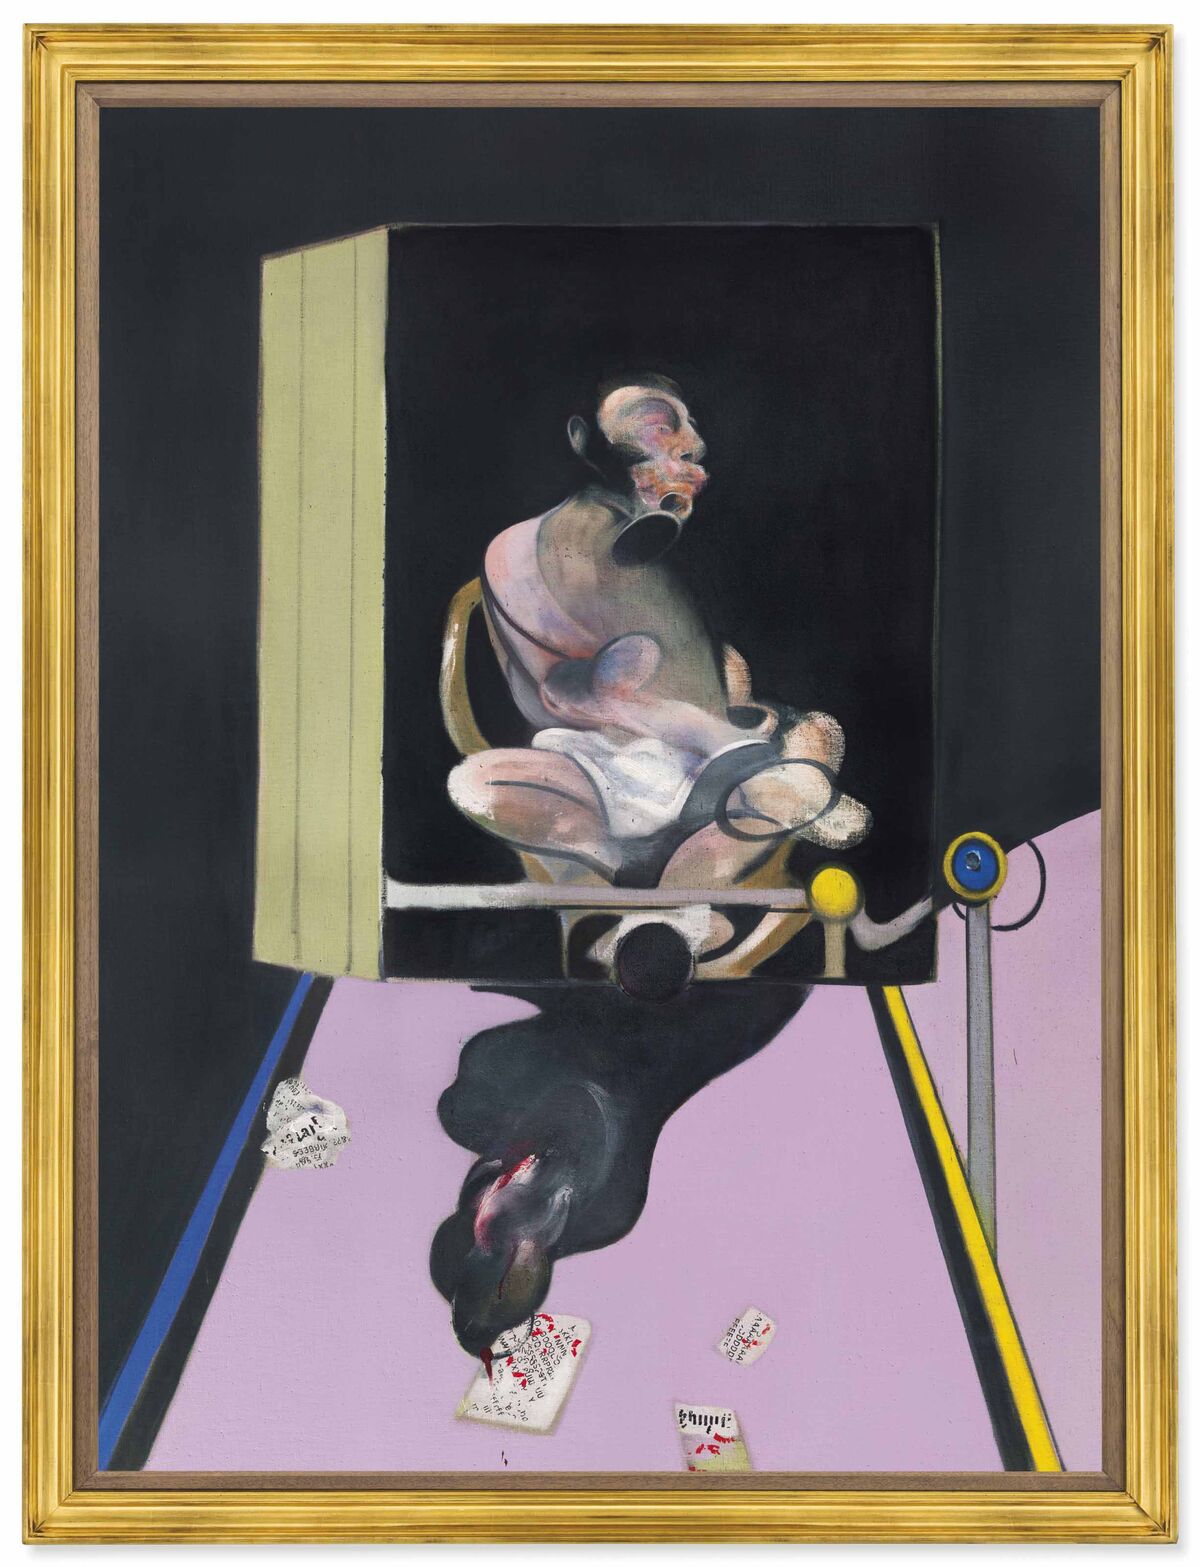 Francis Bacon, Study for Portrait, 1977. Courtesy of Christie’s. 